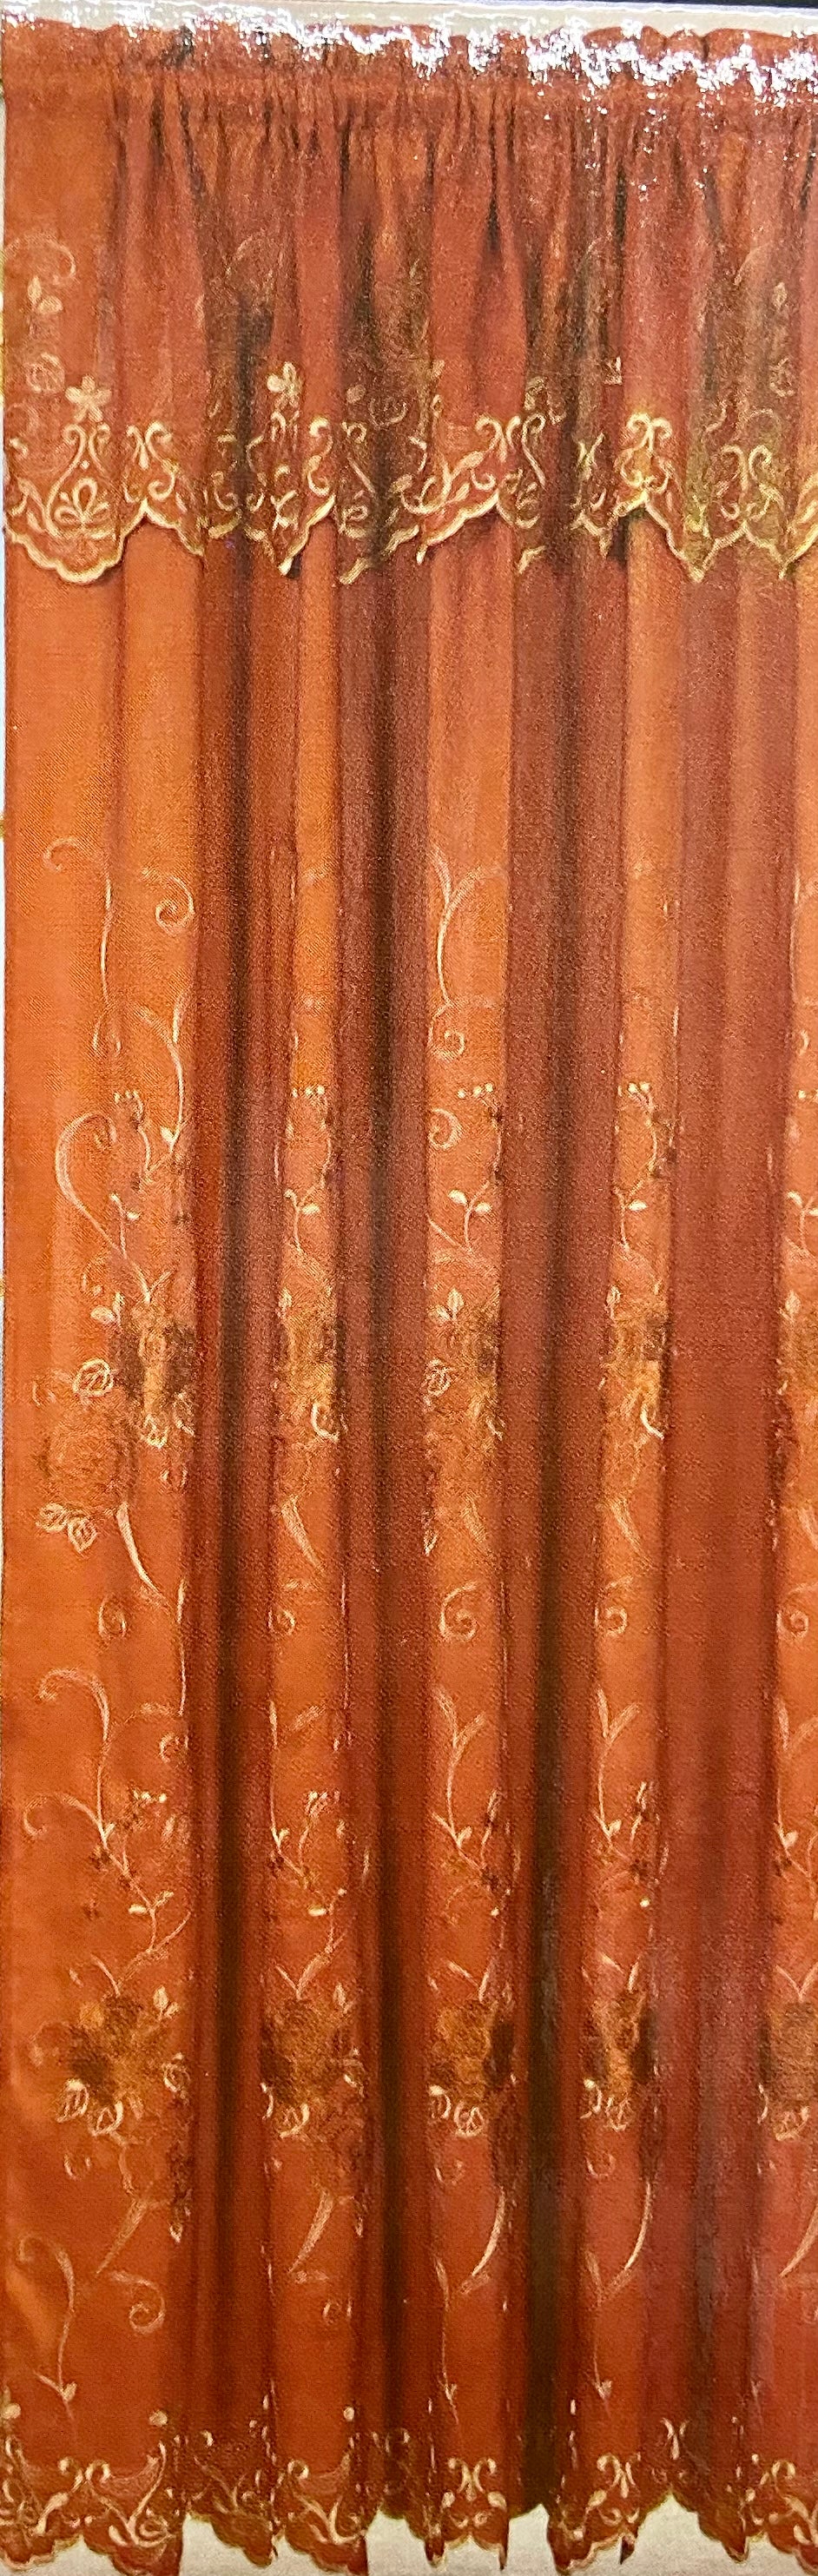 Darden Curtain with Attached Valance